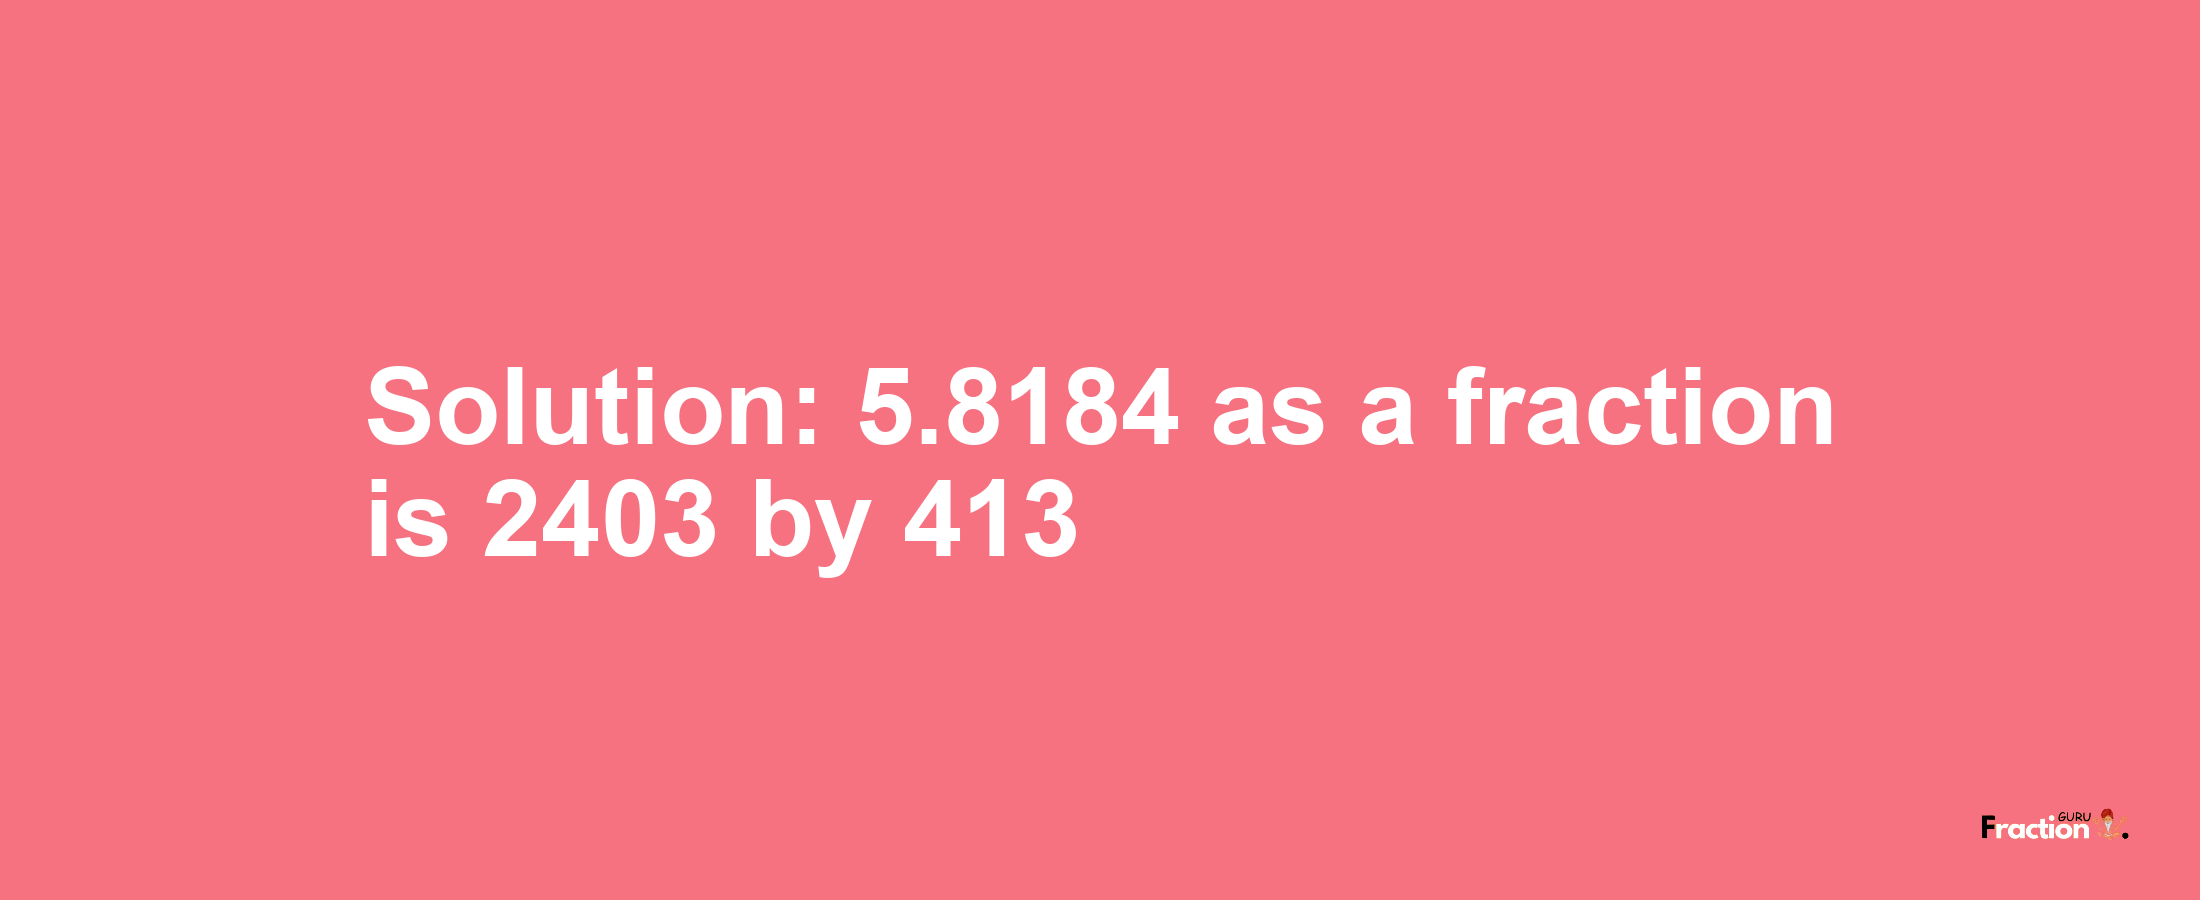 Solution:5.8184 as a fraction is 2403/413